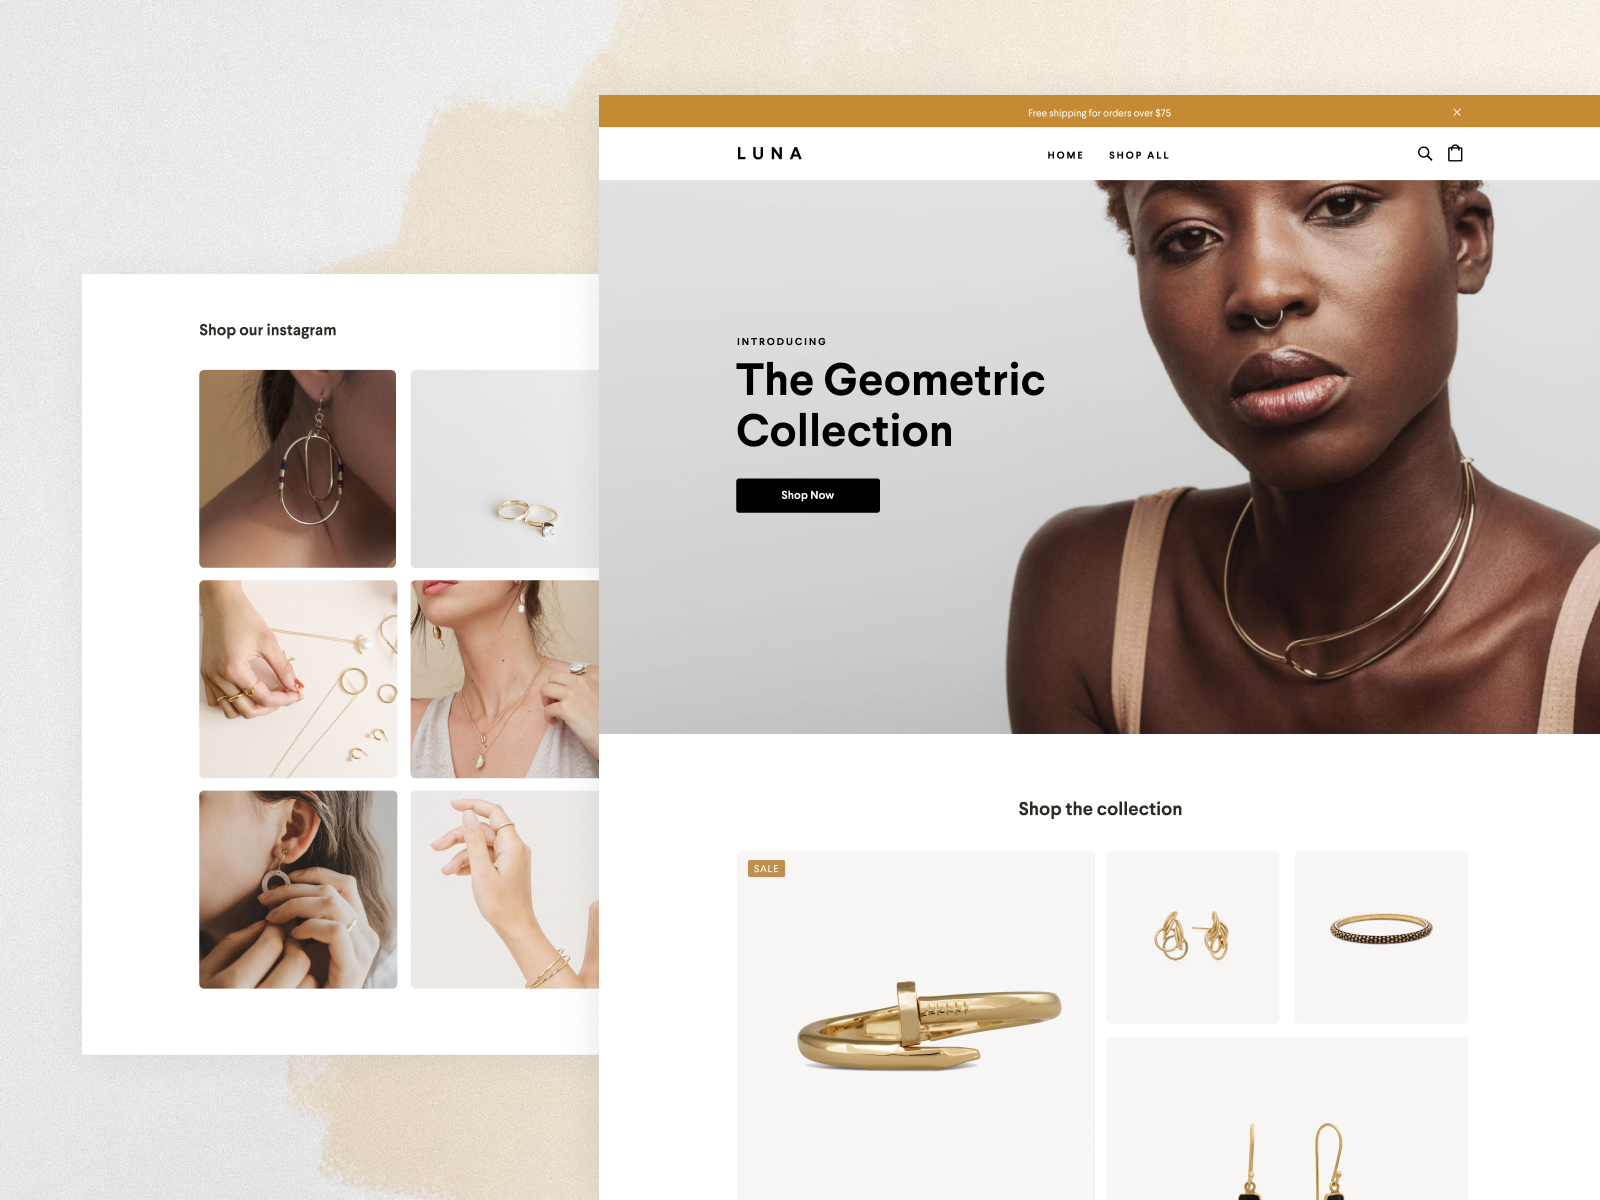 Square online store - Luna retail template by Kaity Hammerstein on Dribbble